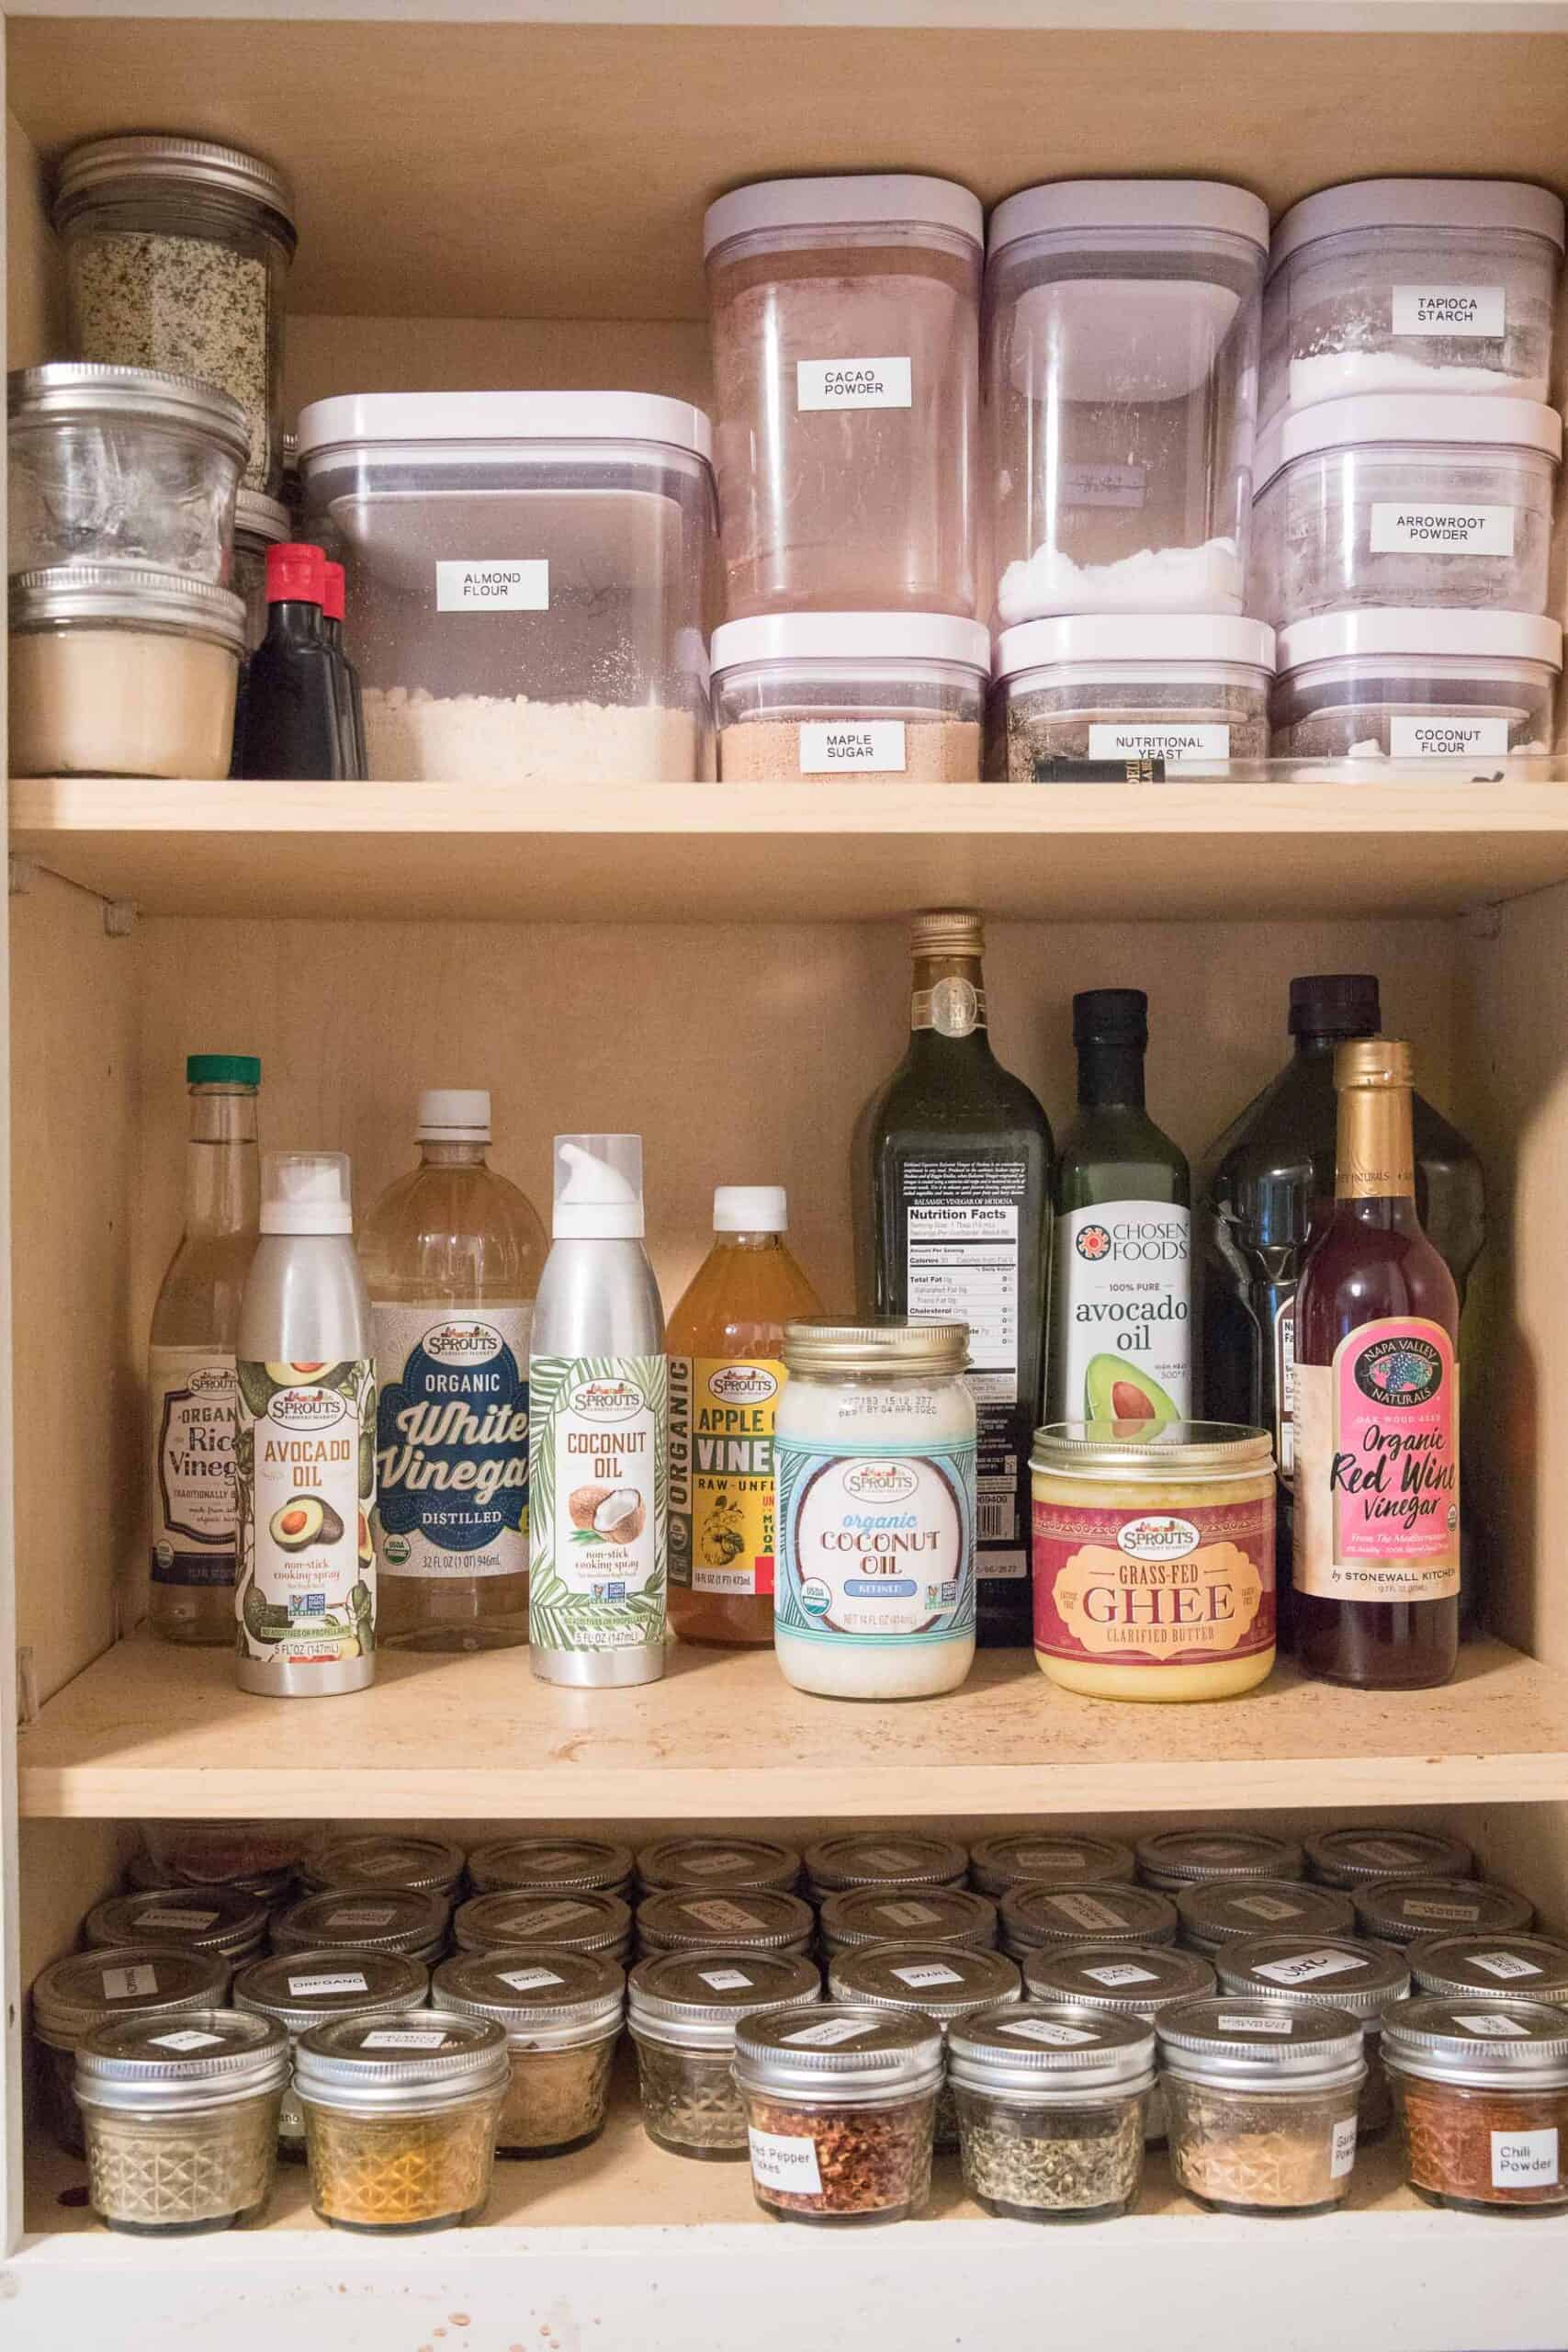 https://www.tasteslovely.com/wp-content/uploads/2020/01/How-to-stock-a-keto-kitchen-spice-cabinet-baking-cabinet-scaled.jpg